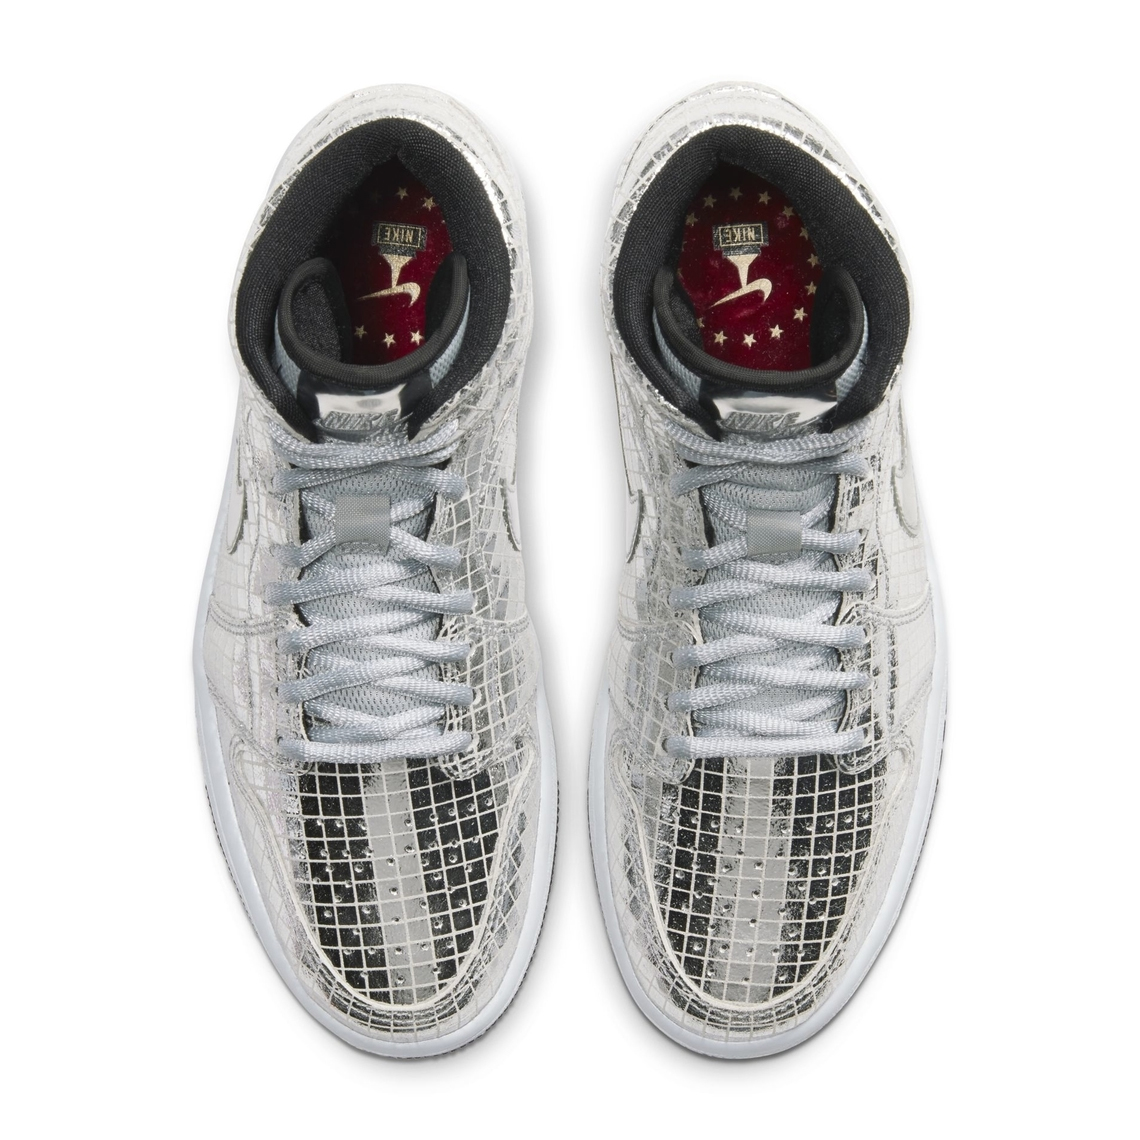 Air feet images air jordan v melo Discoball Official Images 2